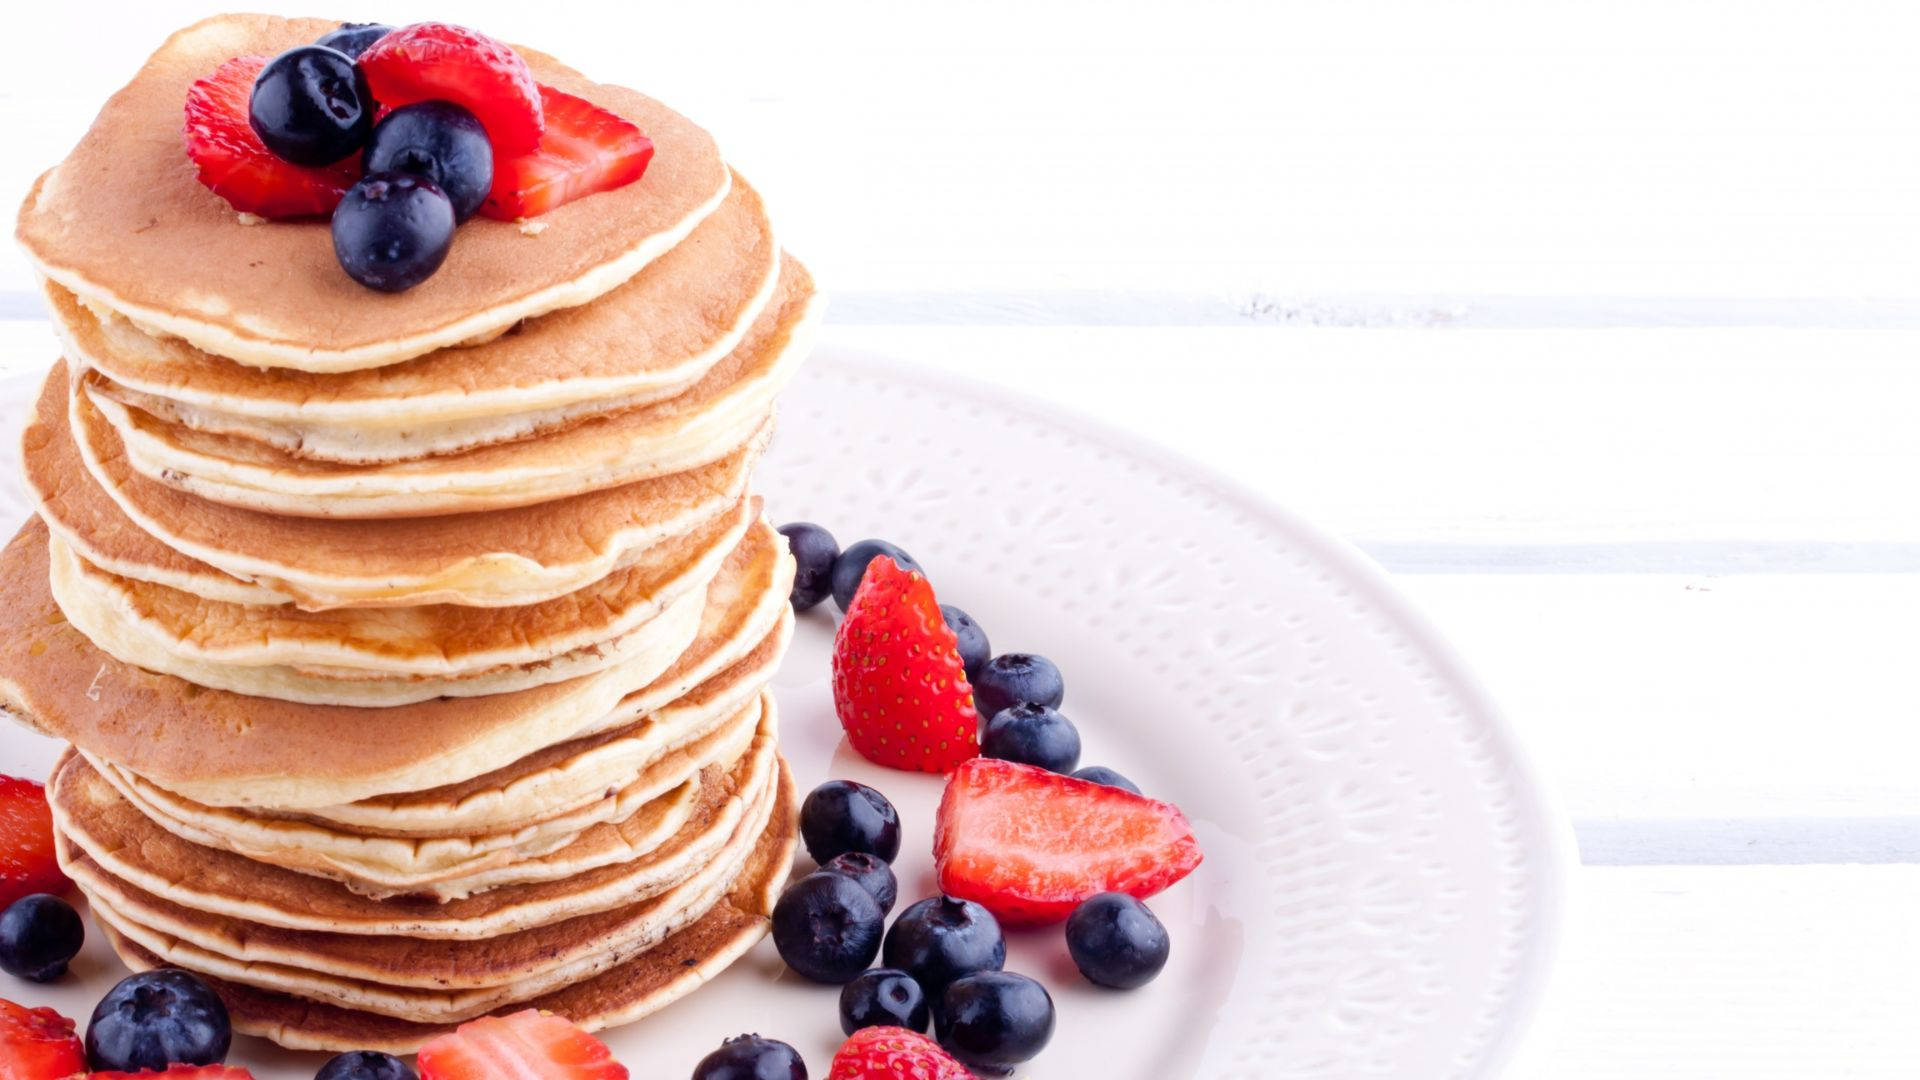 Pancakes Surrounded By Berries Background